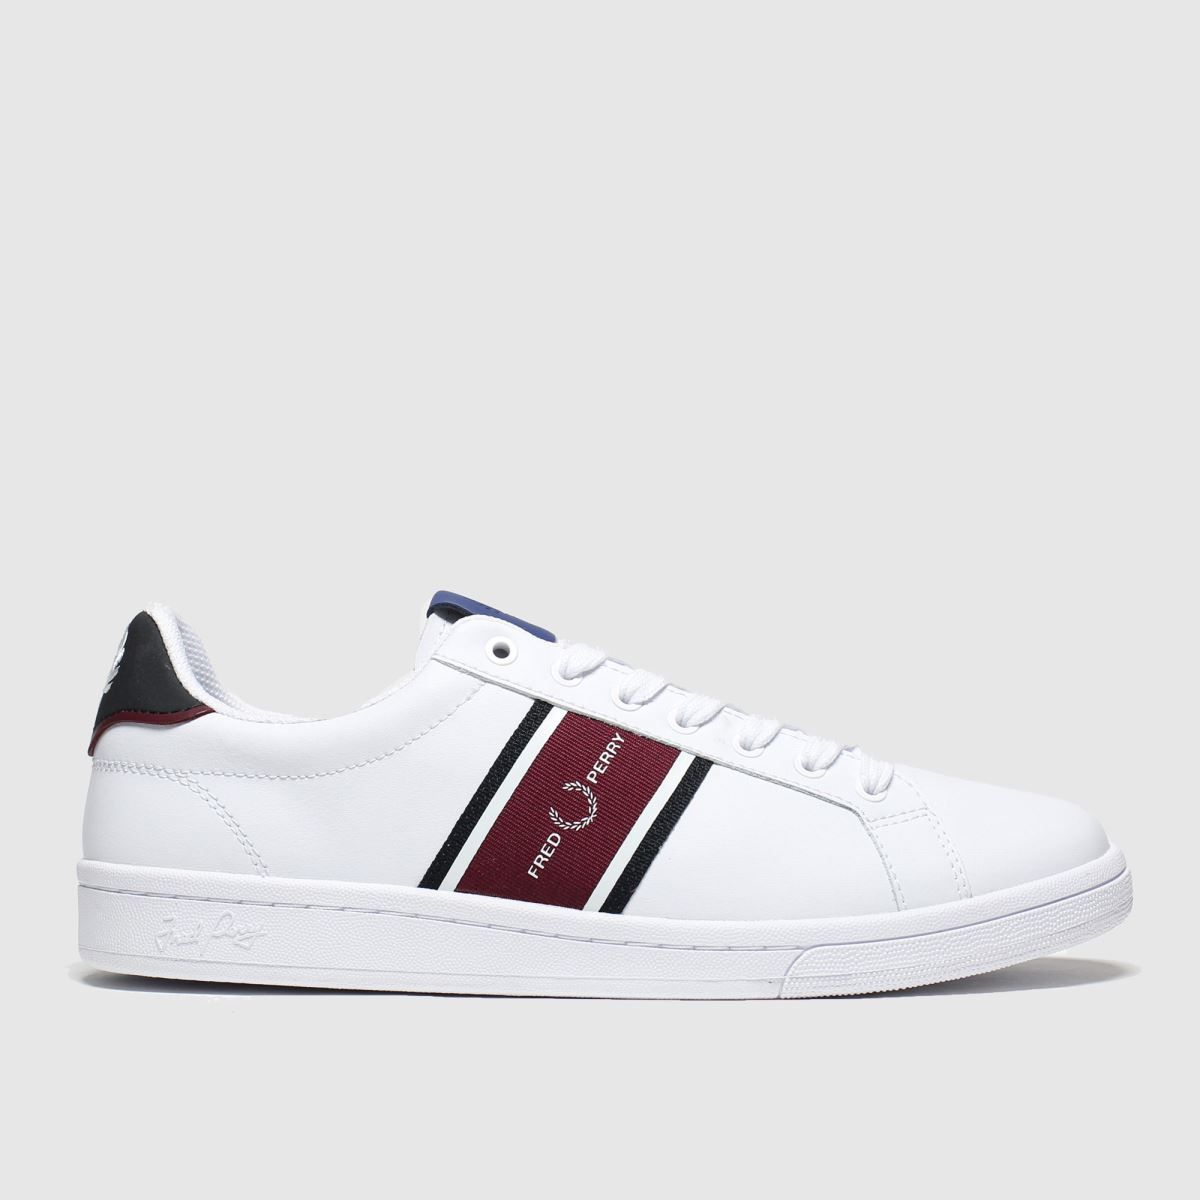 fred perry white & gold aubrey trainers